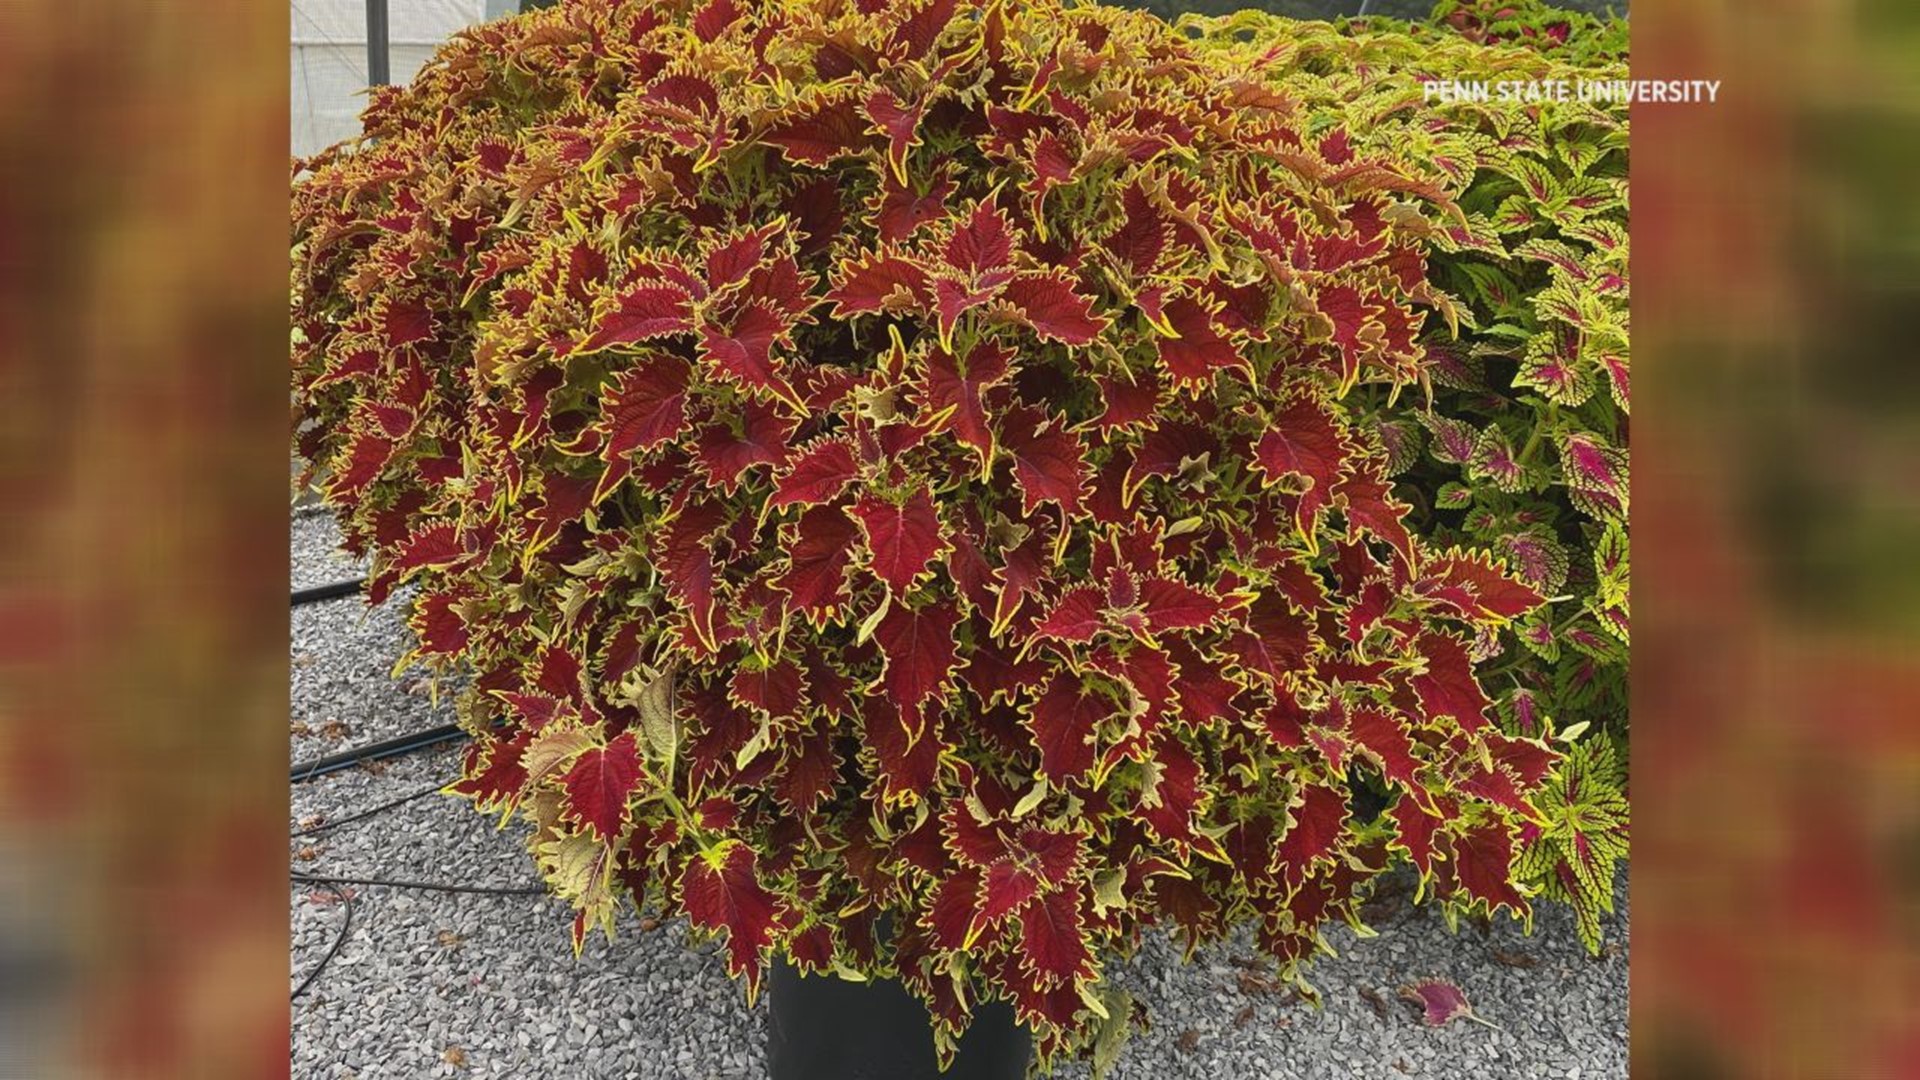 Highlights from the 2021 trials include a Coleus "Copperhead" and Honeybells, which will be available to gardeners this year.